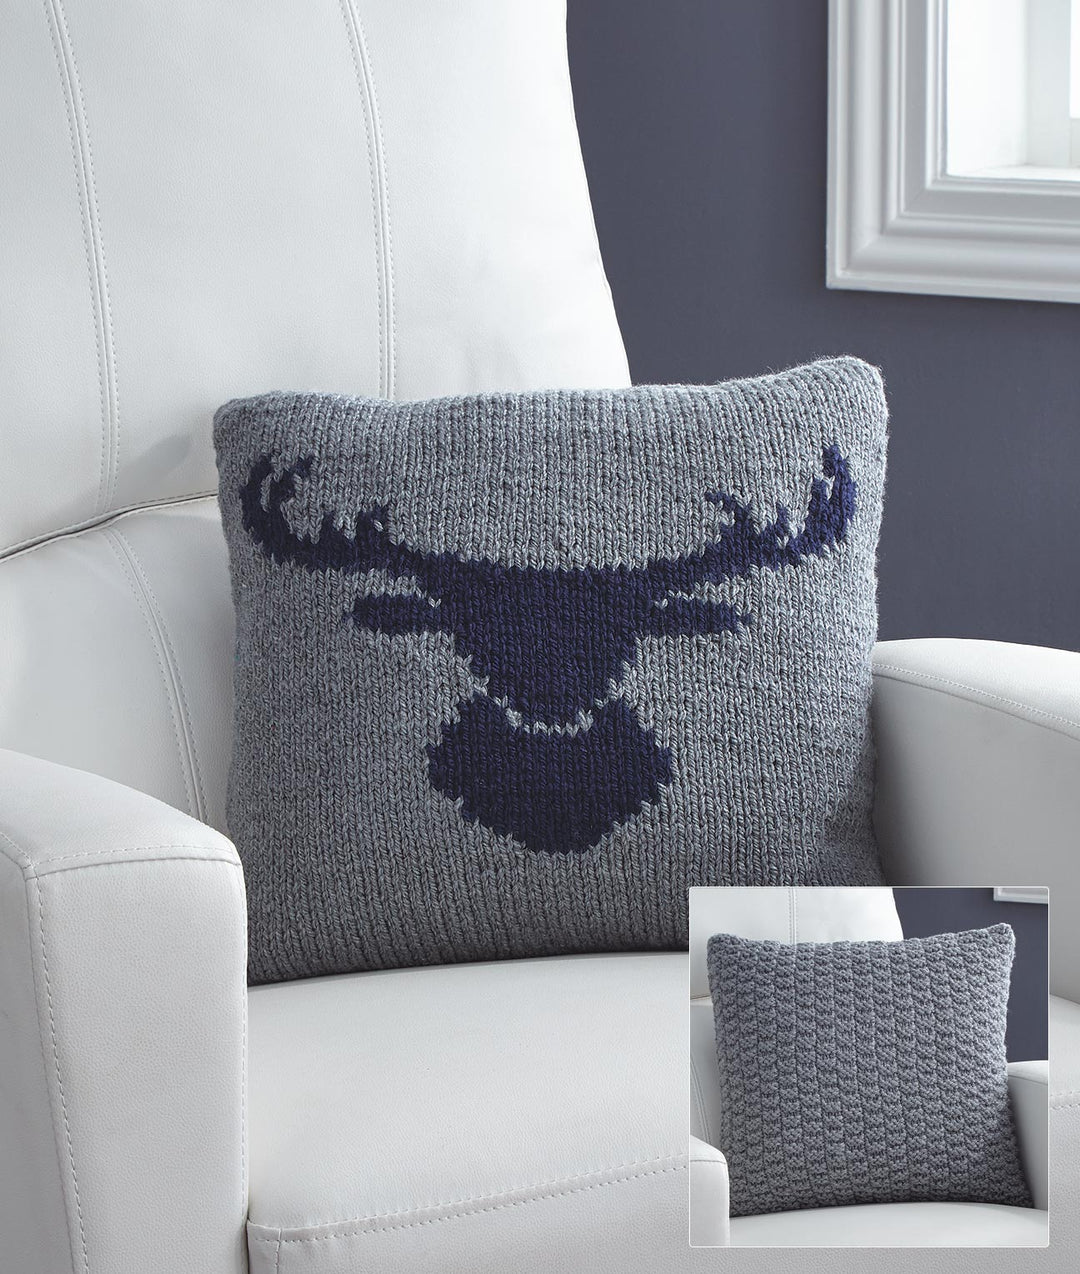 Stag Head Pillow Cover Pattern